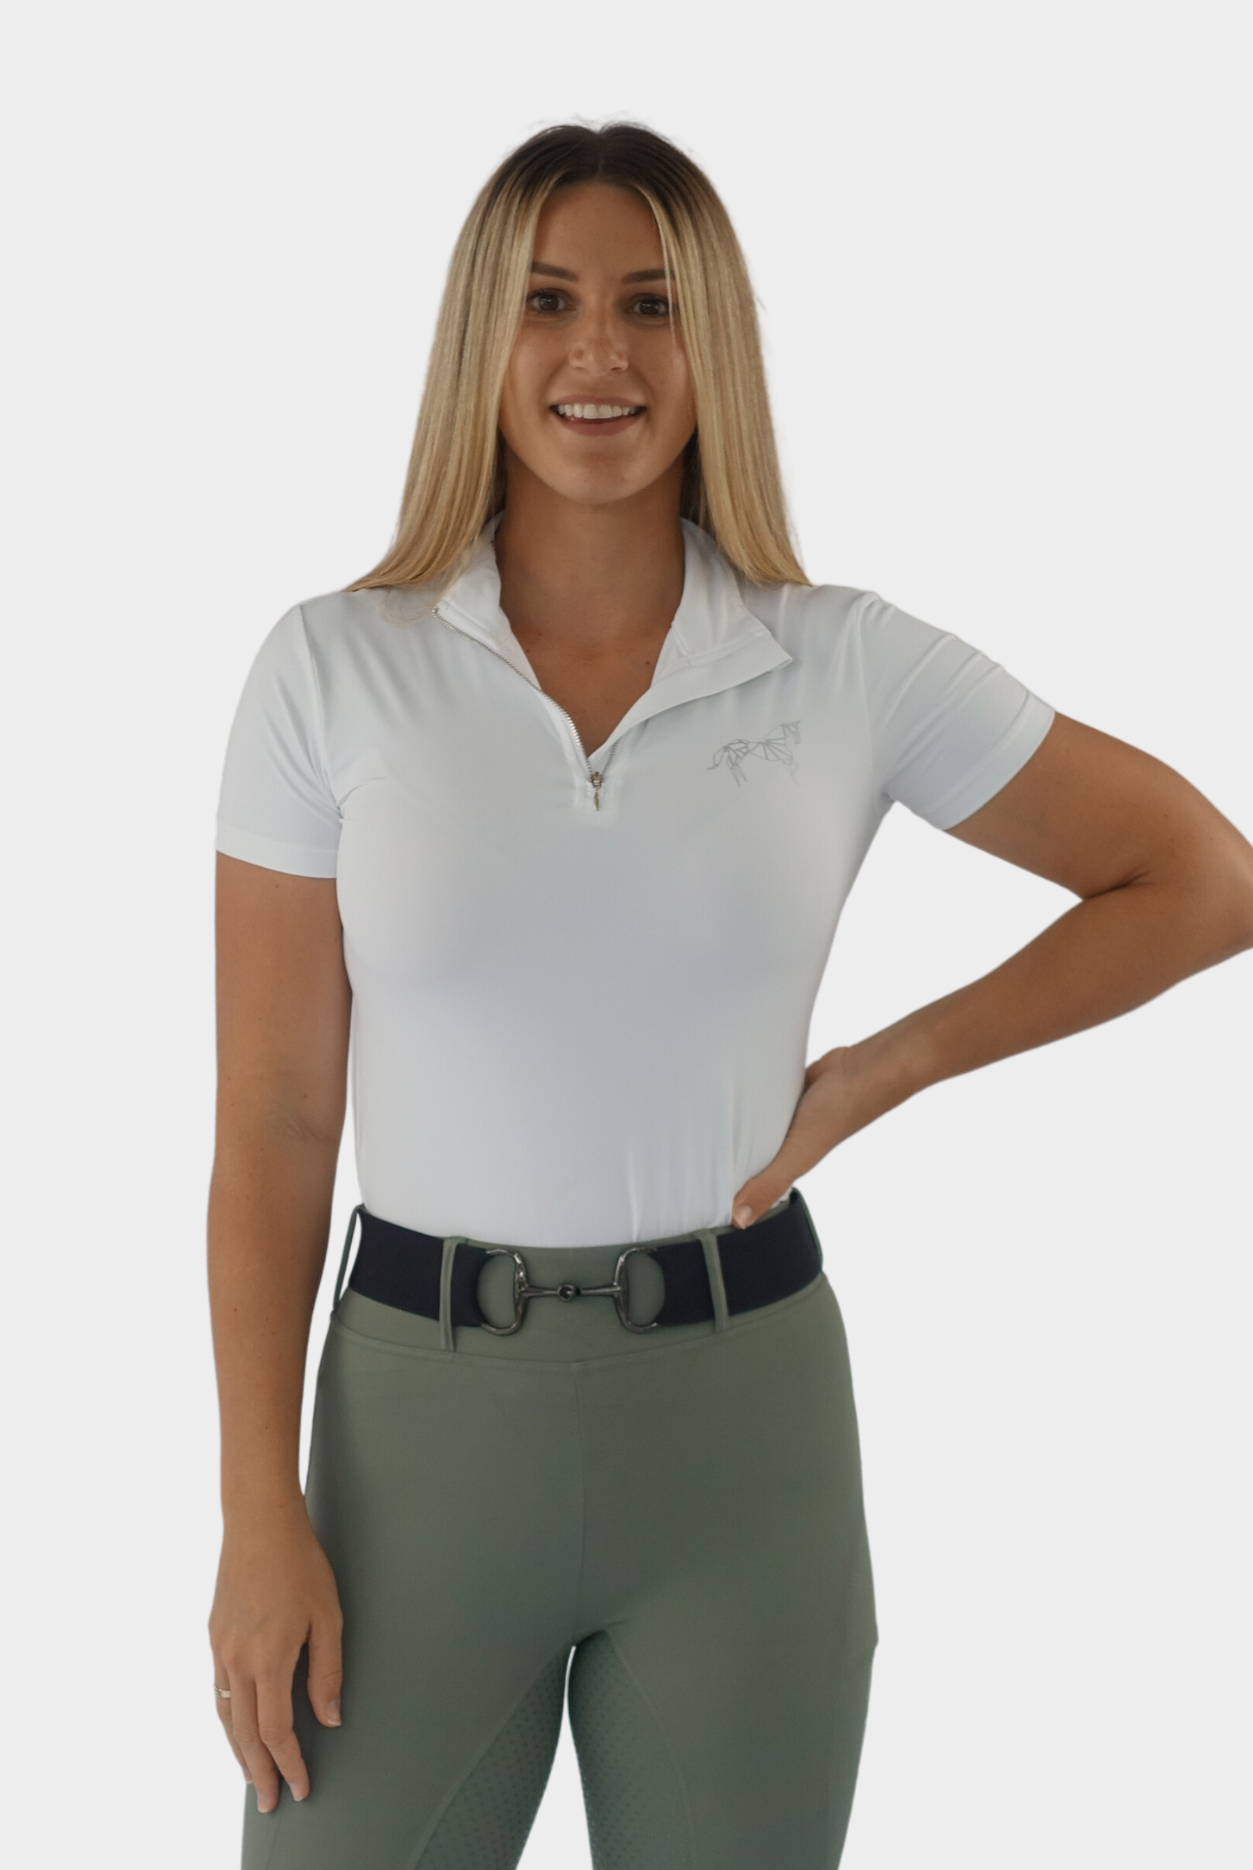 A woman with long blonde hair stands smiling against a plain background. She is wearing a white short-sleeved zip-up shirt and olive green pants with a belt, perfect for rider wear. Her right arm is bent at the elbow with her hand resting on her hip, and her left arm is relaxed by her side. She is sporting the Motion Top Short - White from Pure Canter.